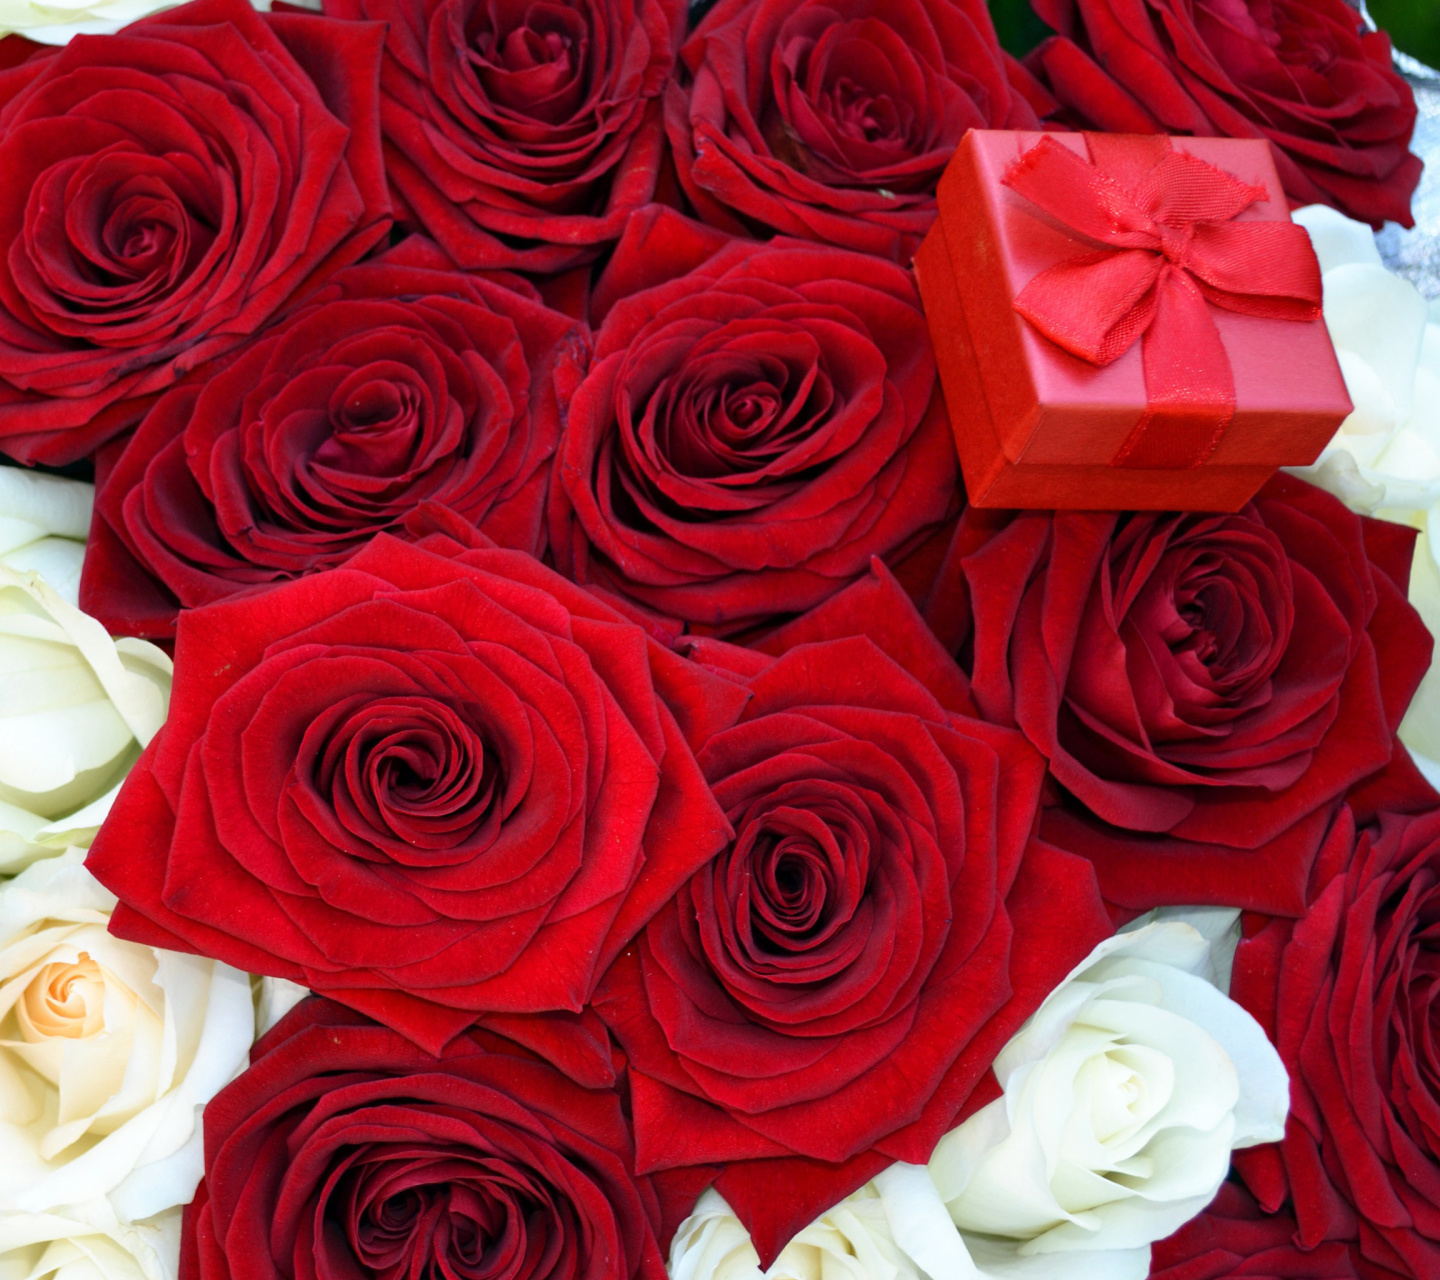 Das Roses for Propose Wallpaper 1440x1280